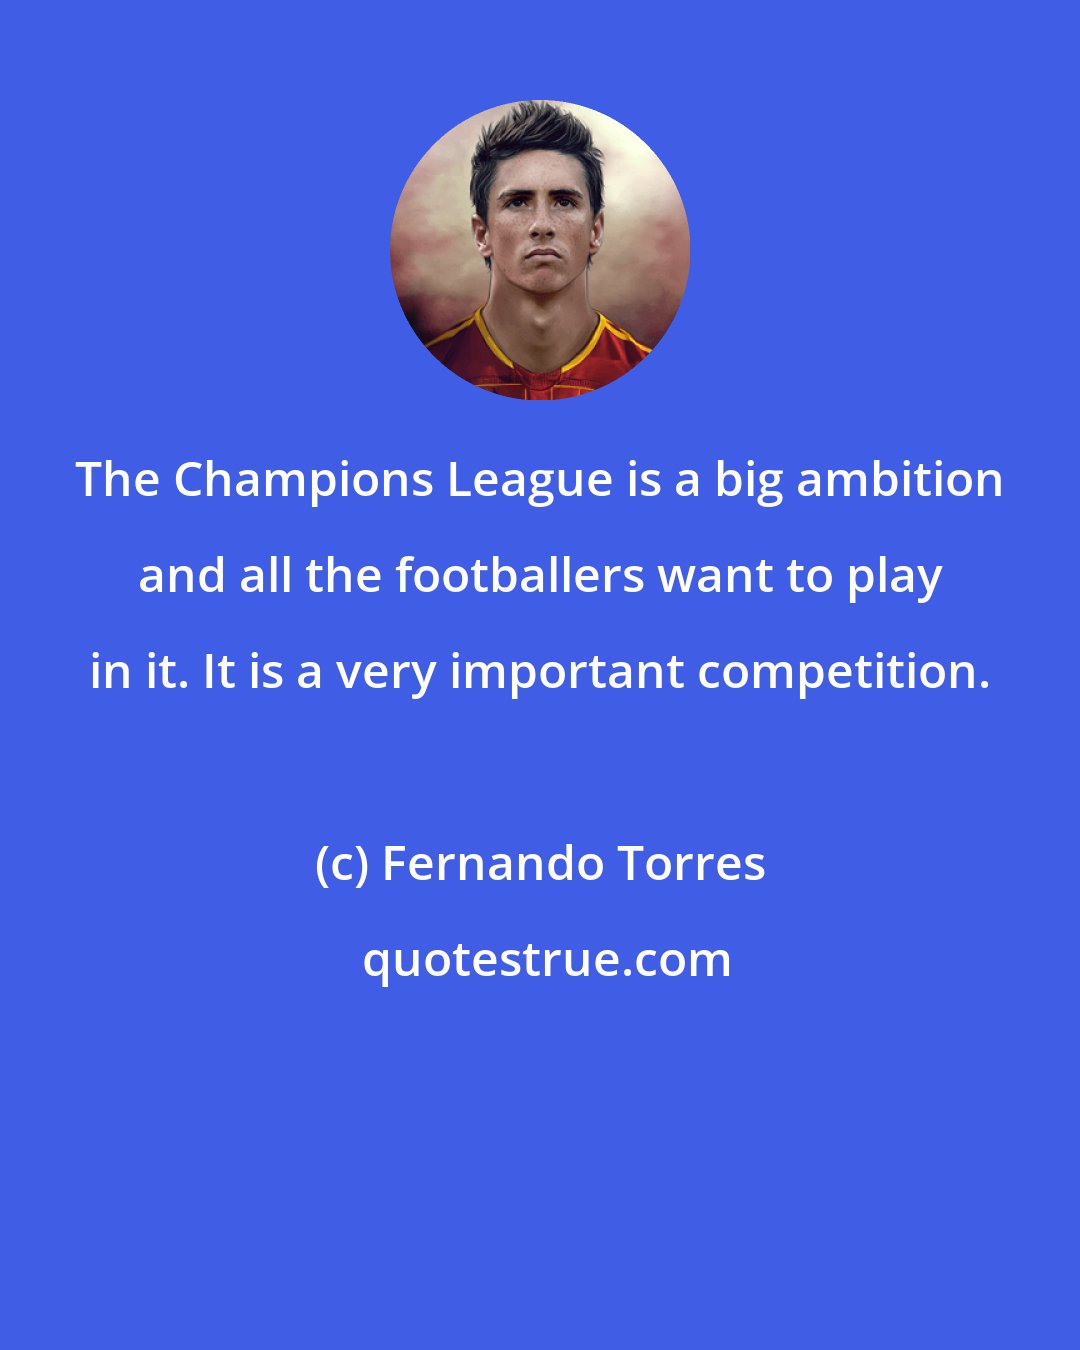 Fernando Torres: The Champions League is a big ambition and all the footballers want to play in it. It is a very important competition.